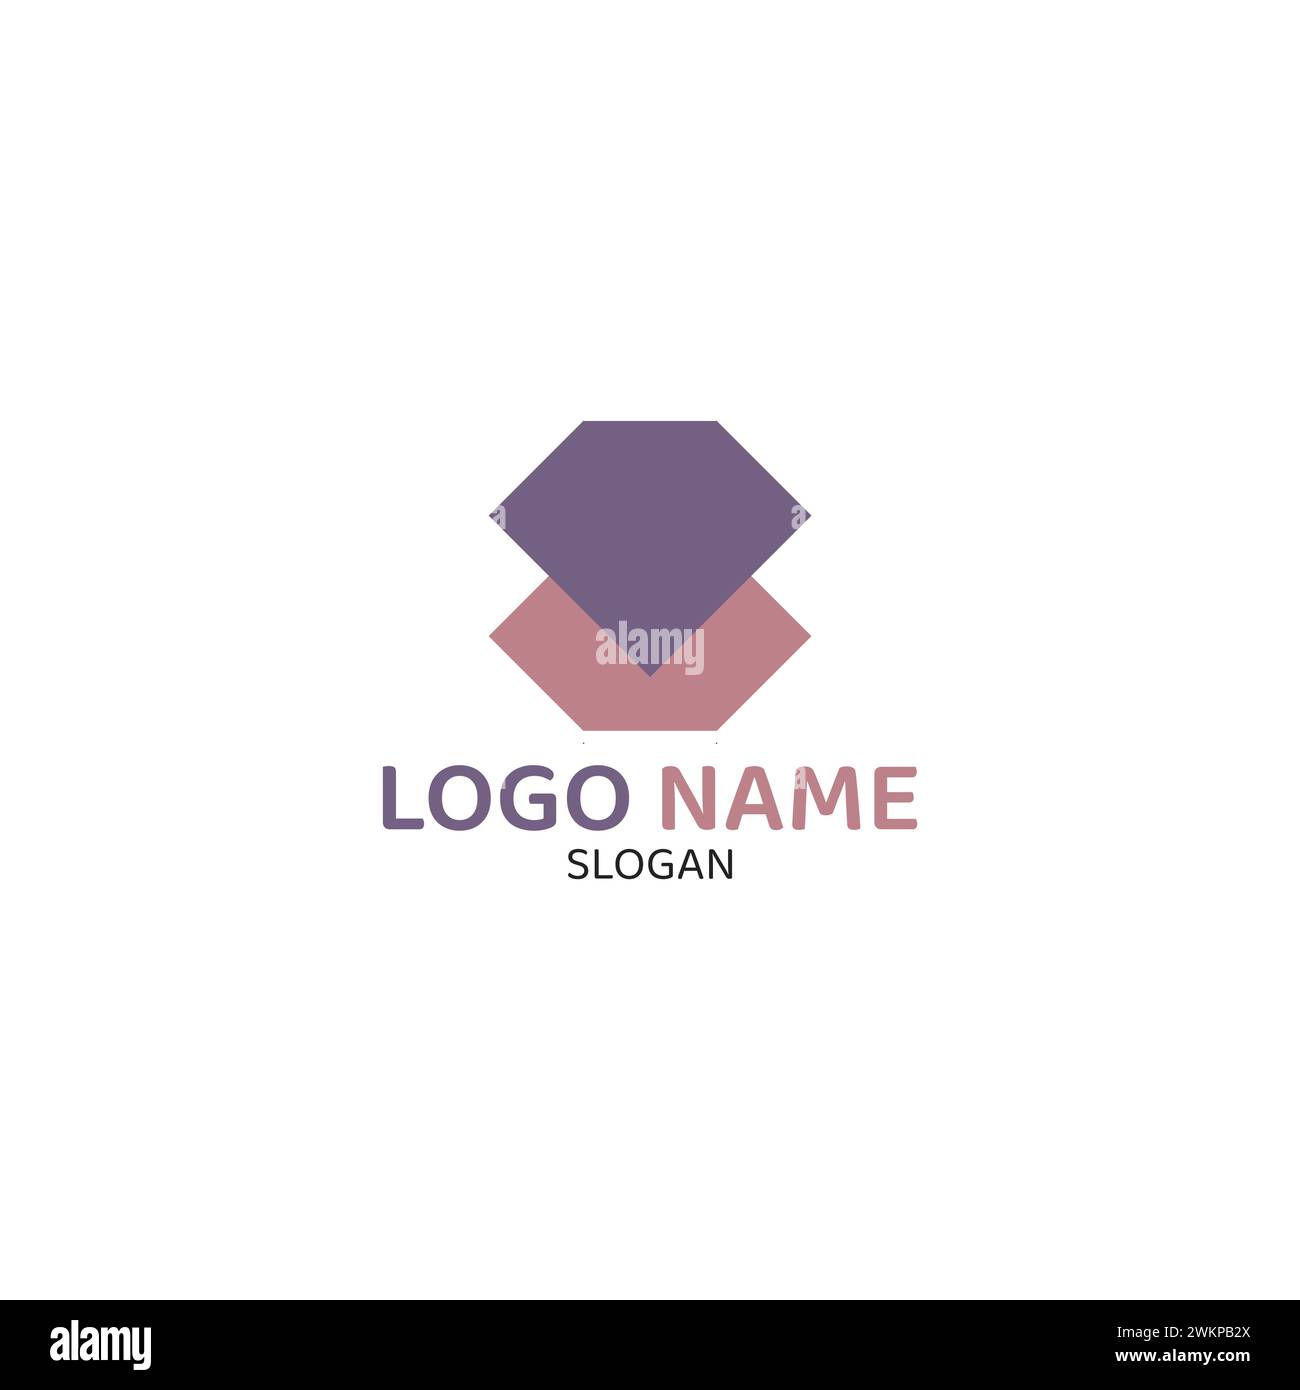 Logo of two abstract shapes in dark purple and light purple colors. Stock Vector